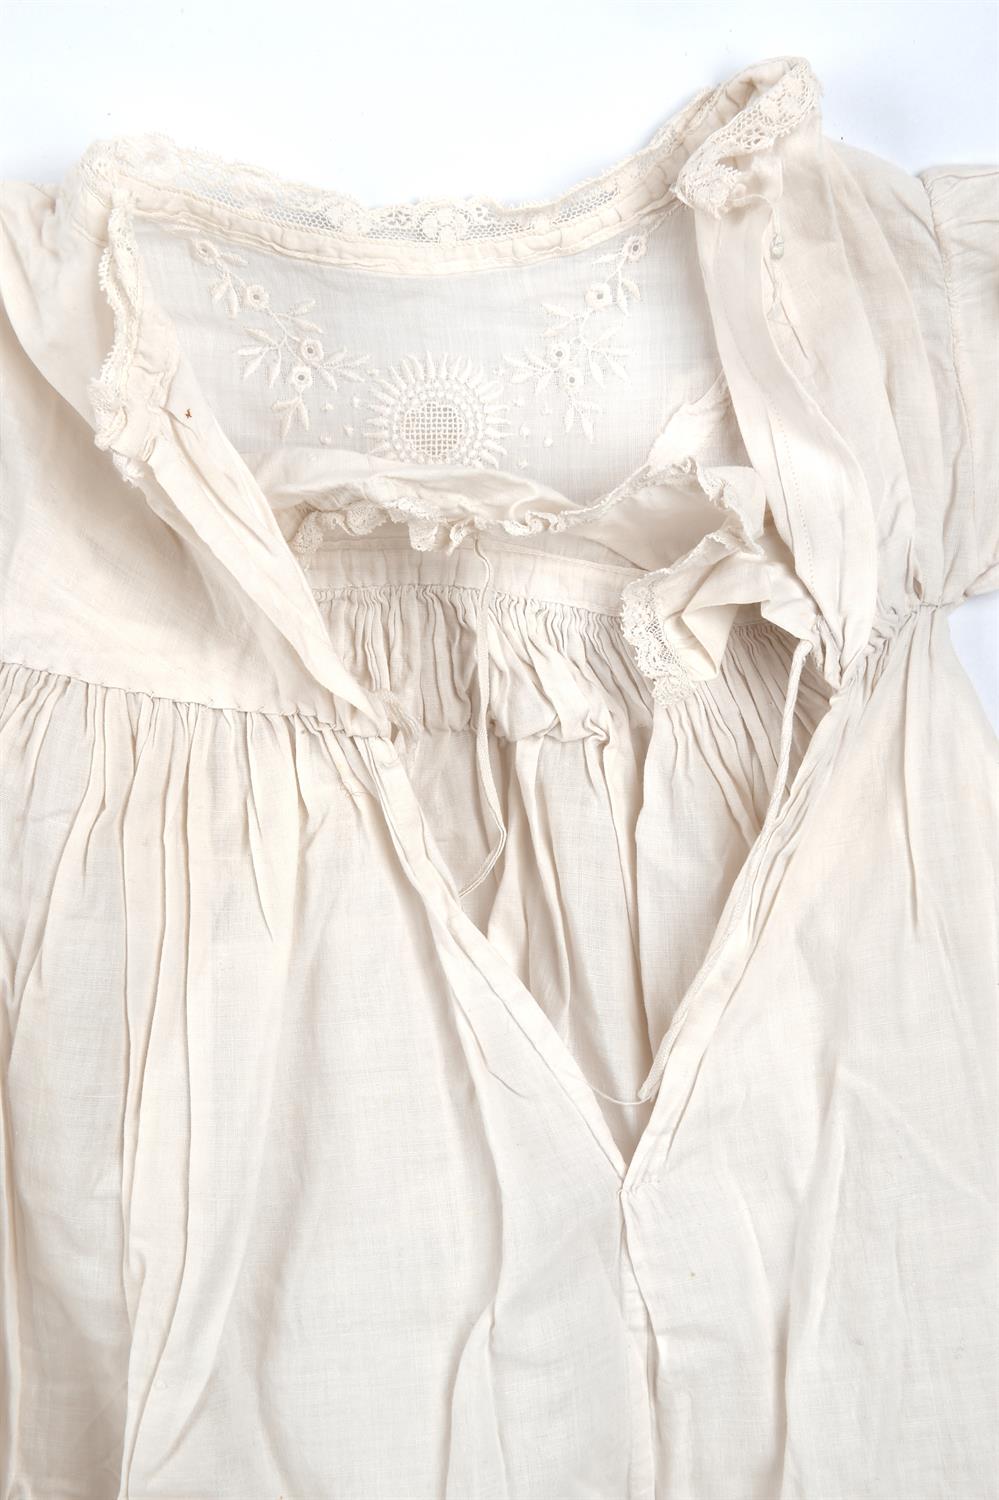 A collection of Victorian and Edwardian lace, christening robes and undergarments 2 half slips, - Image 2 of 5